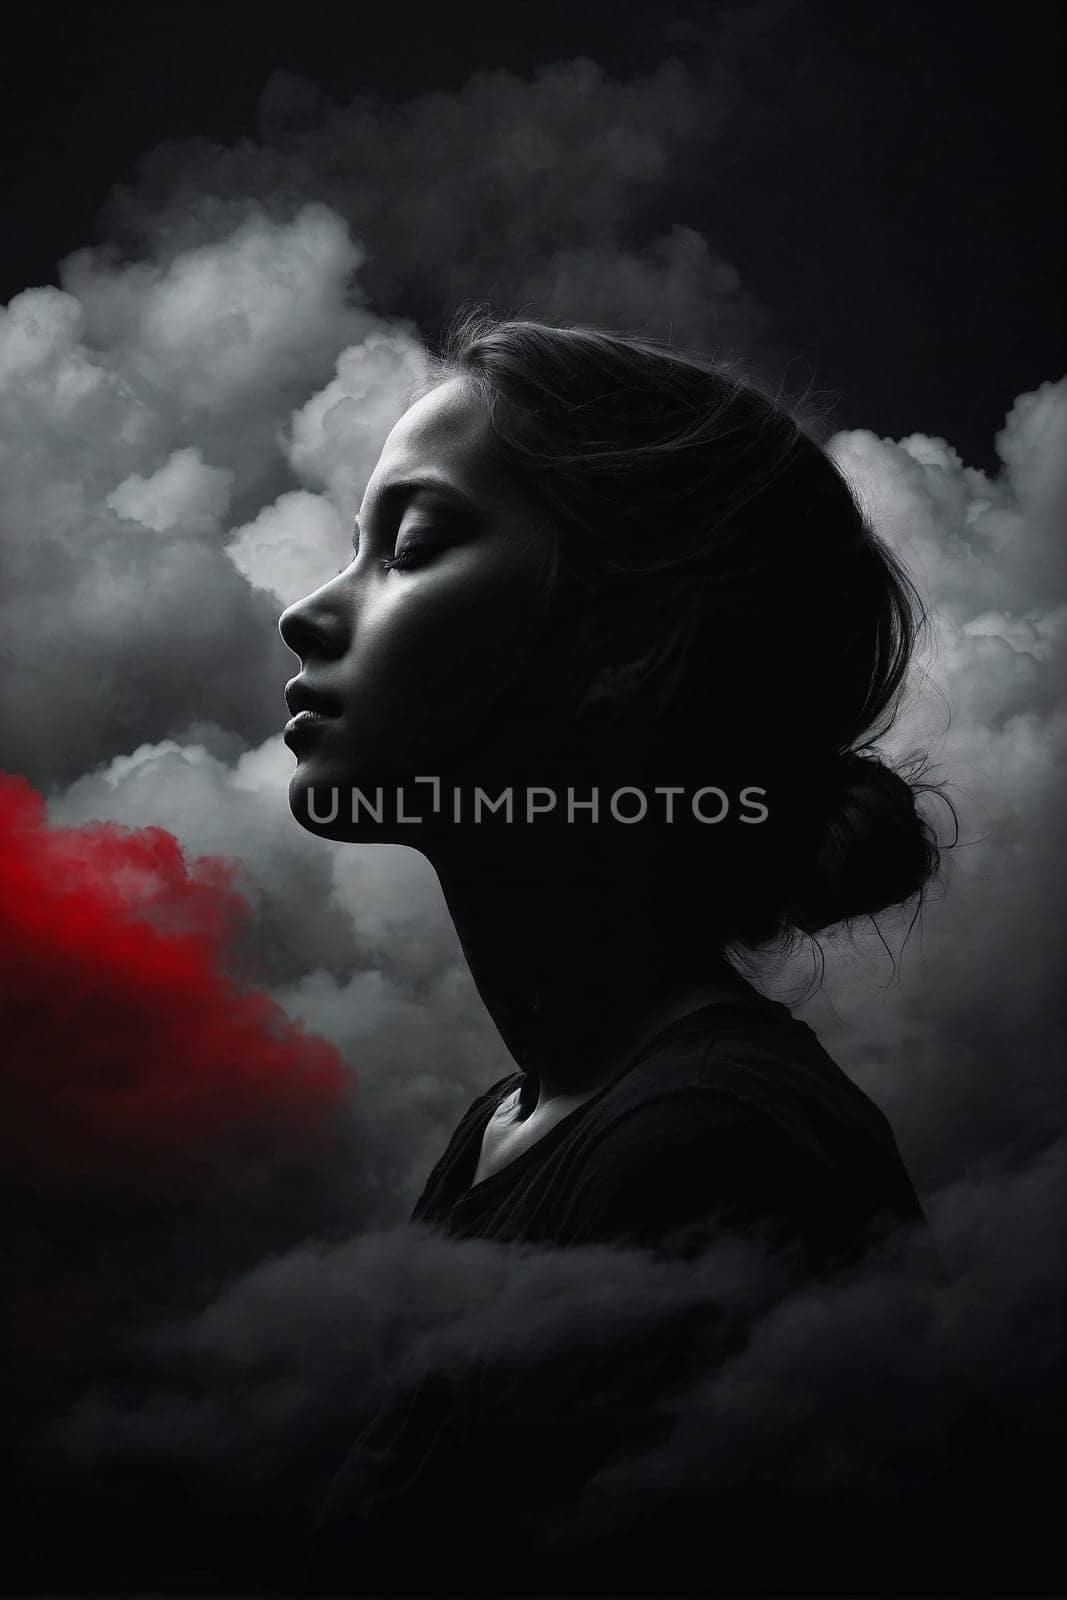 A woman confidently stands amidst the clouds as a vibrant red cloud hovers behind her.